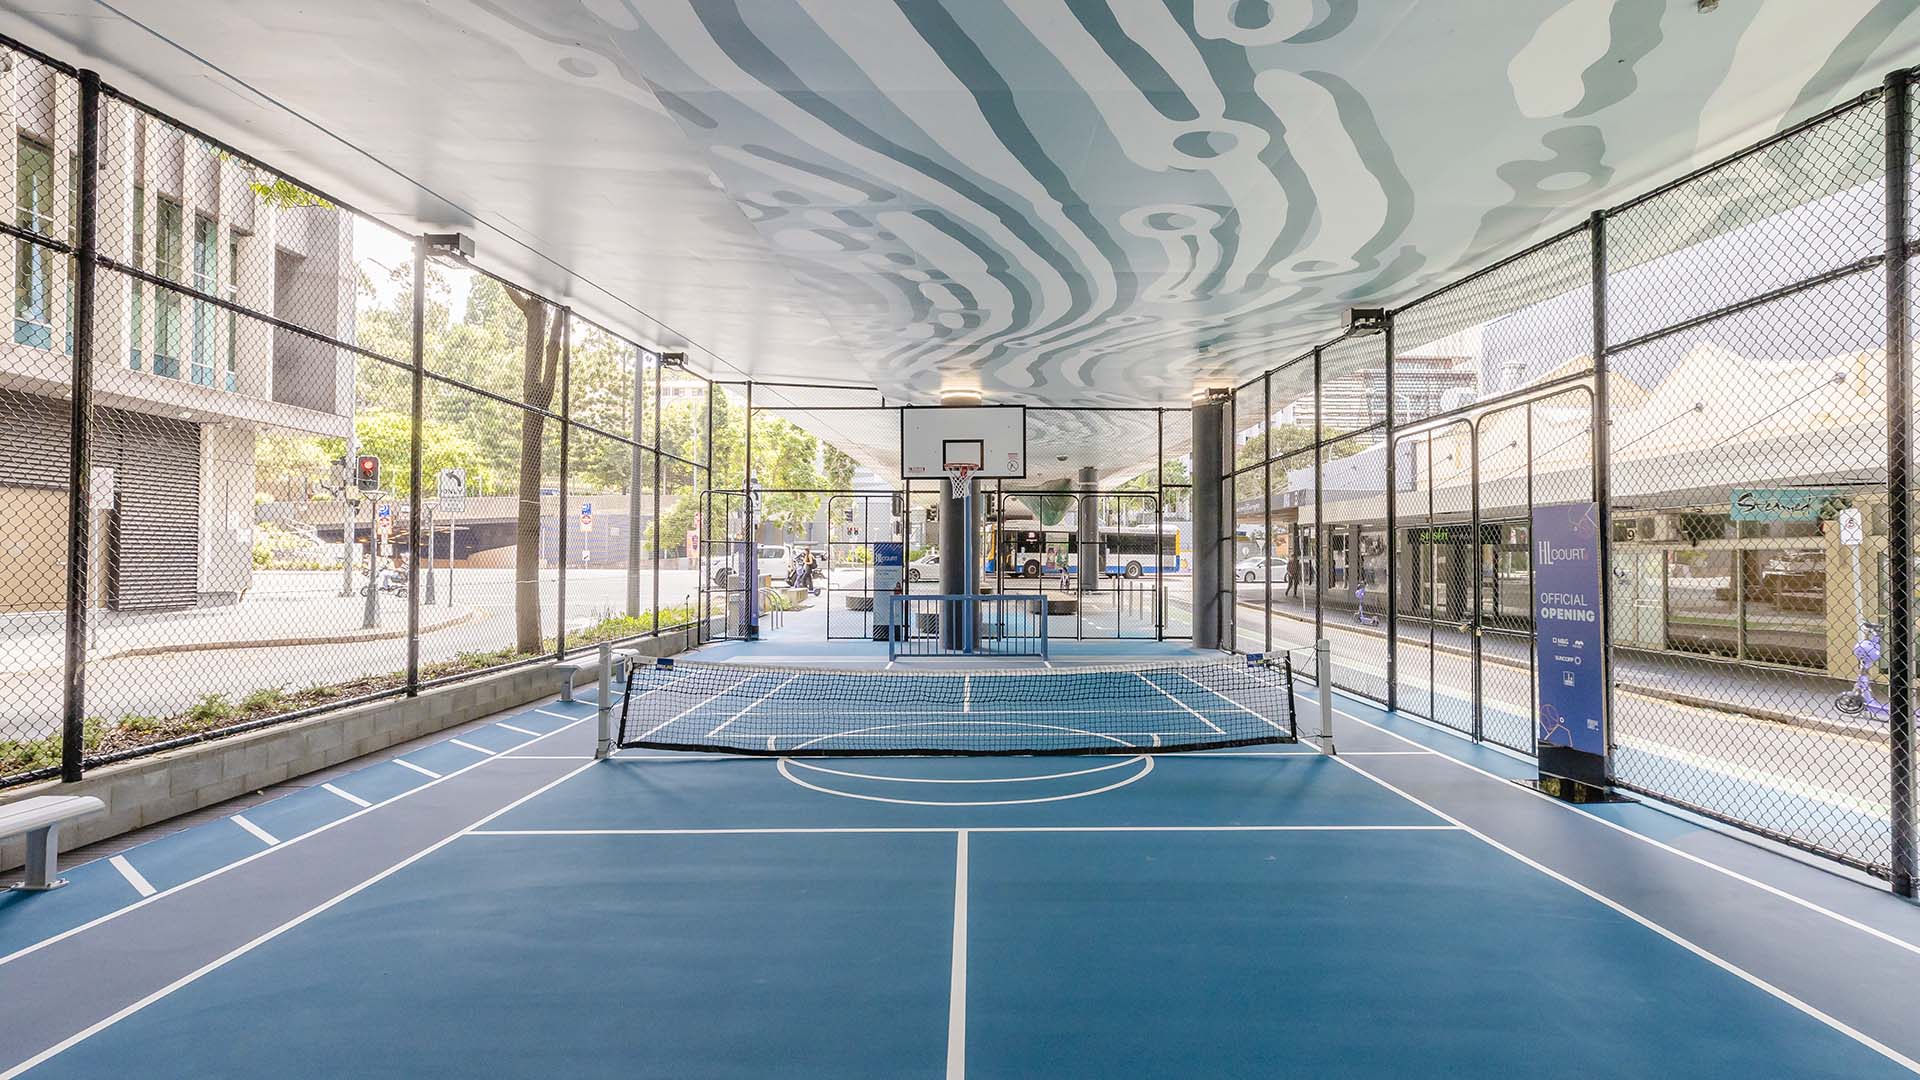 The Turbot Street Underpass Is Now Home to Brisbane CBD's First Free Basketball, Pickleball and Handball Court